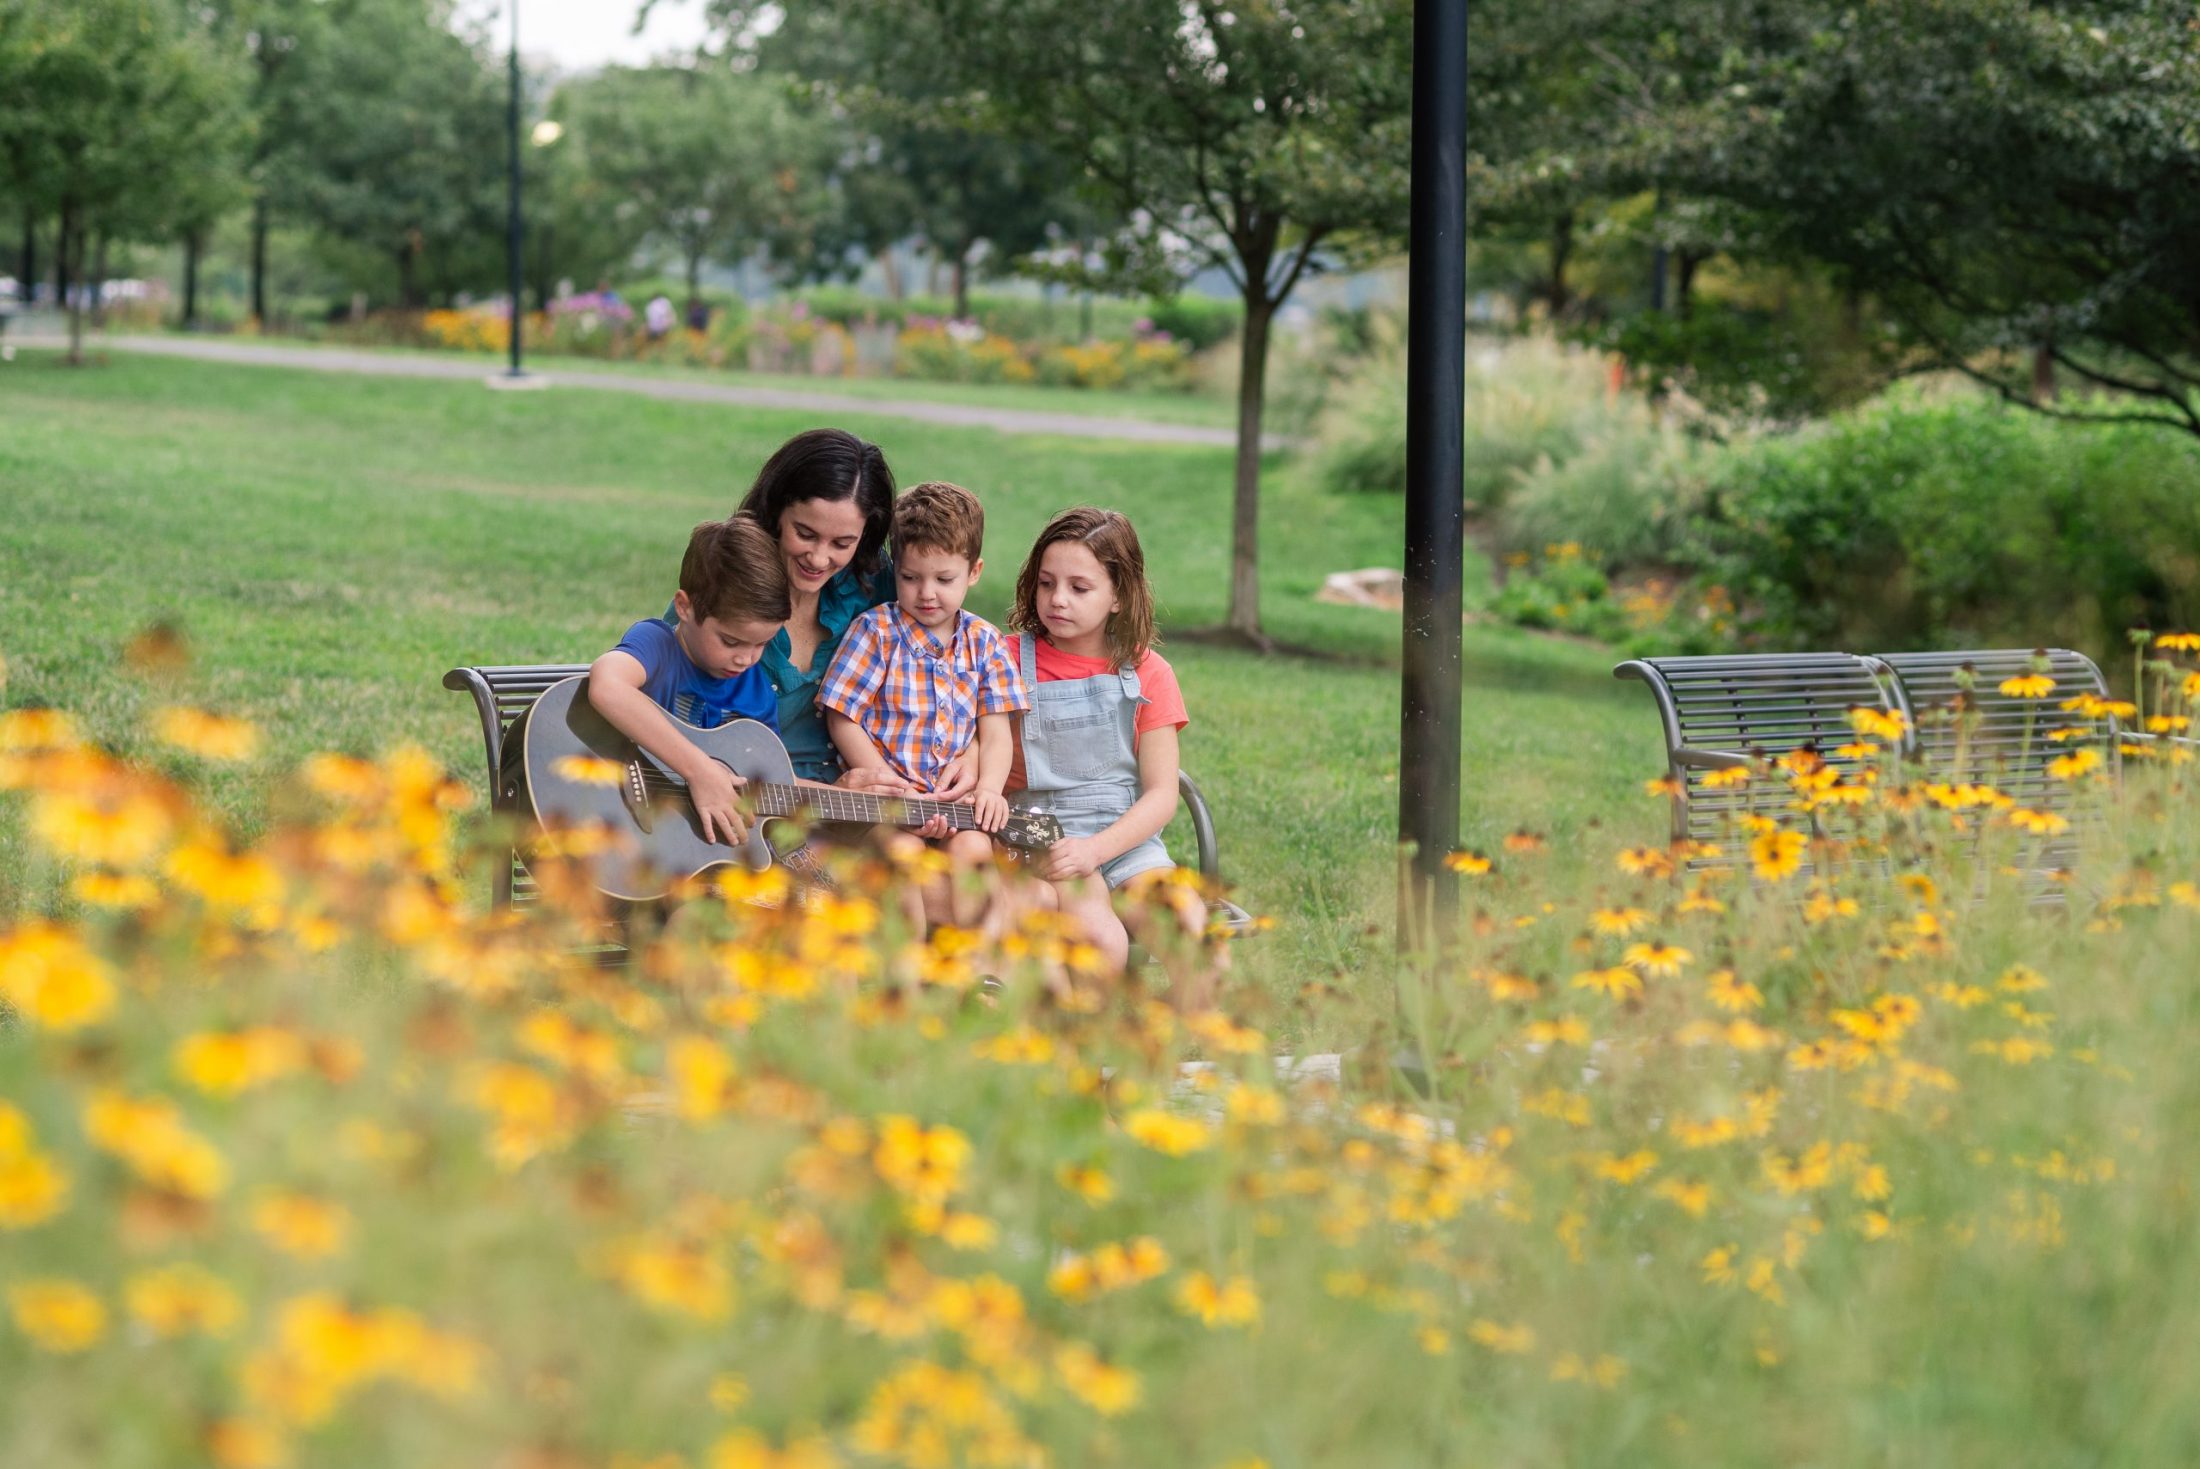 DC widow blog writer Marjorie Brimley on bench with children and flowers